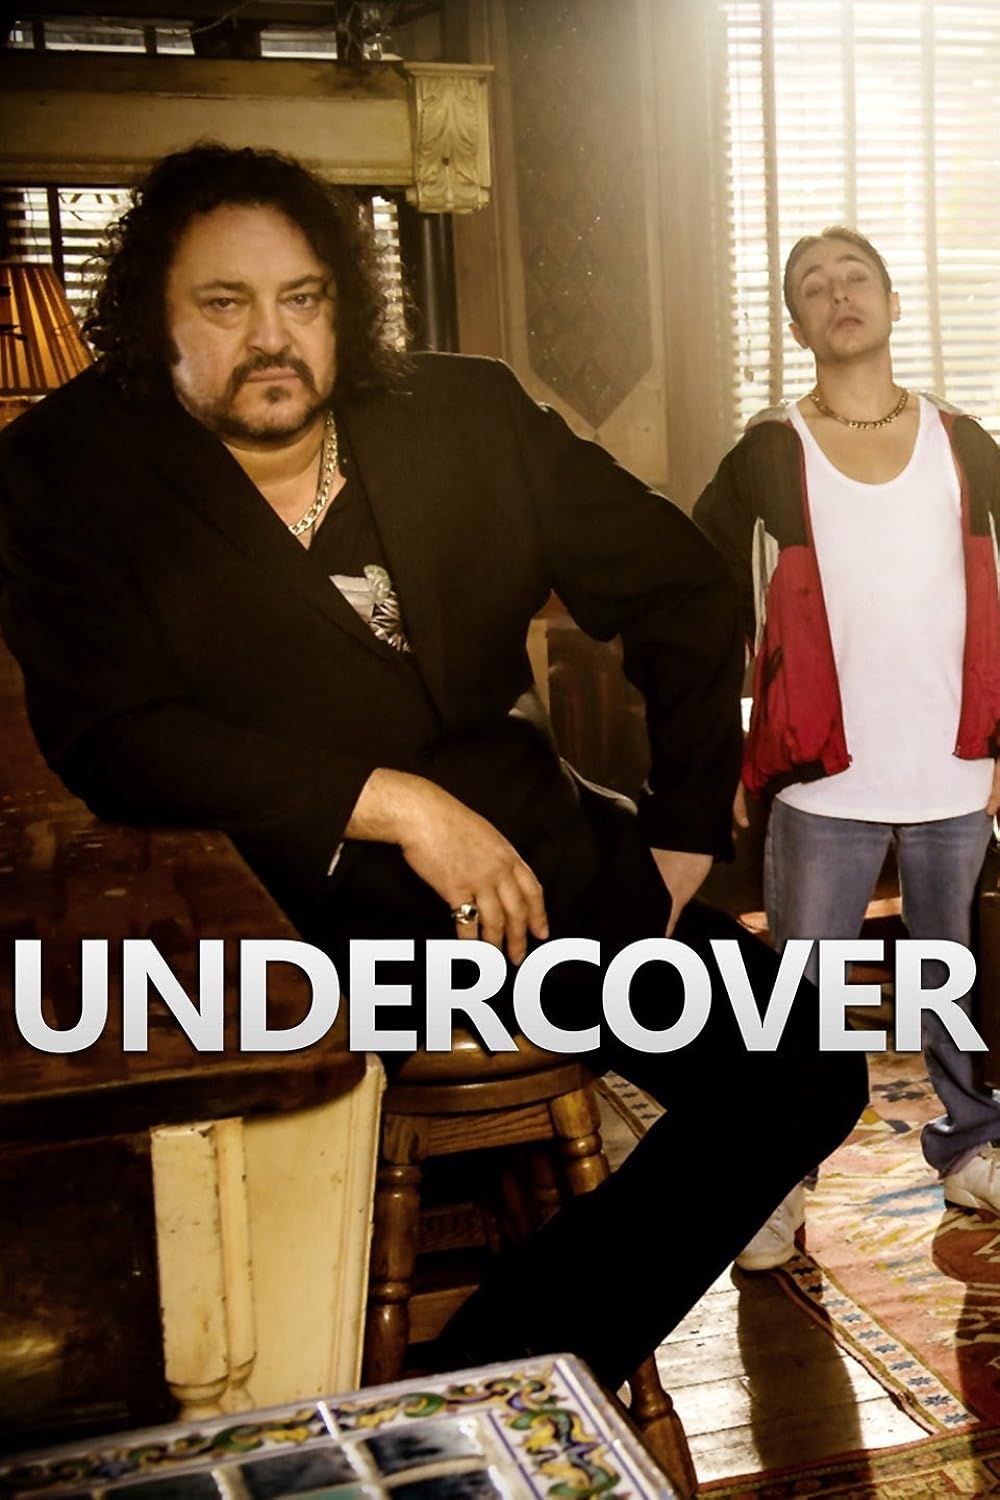 tv show undercover review